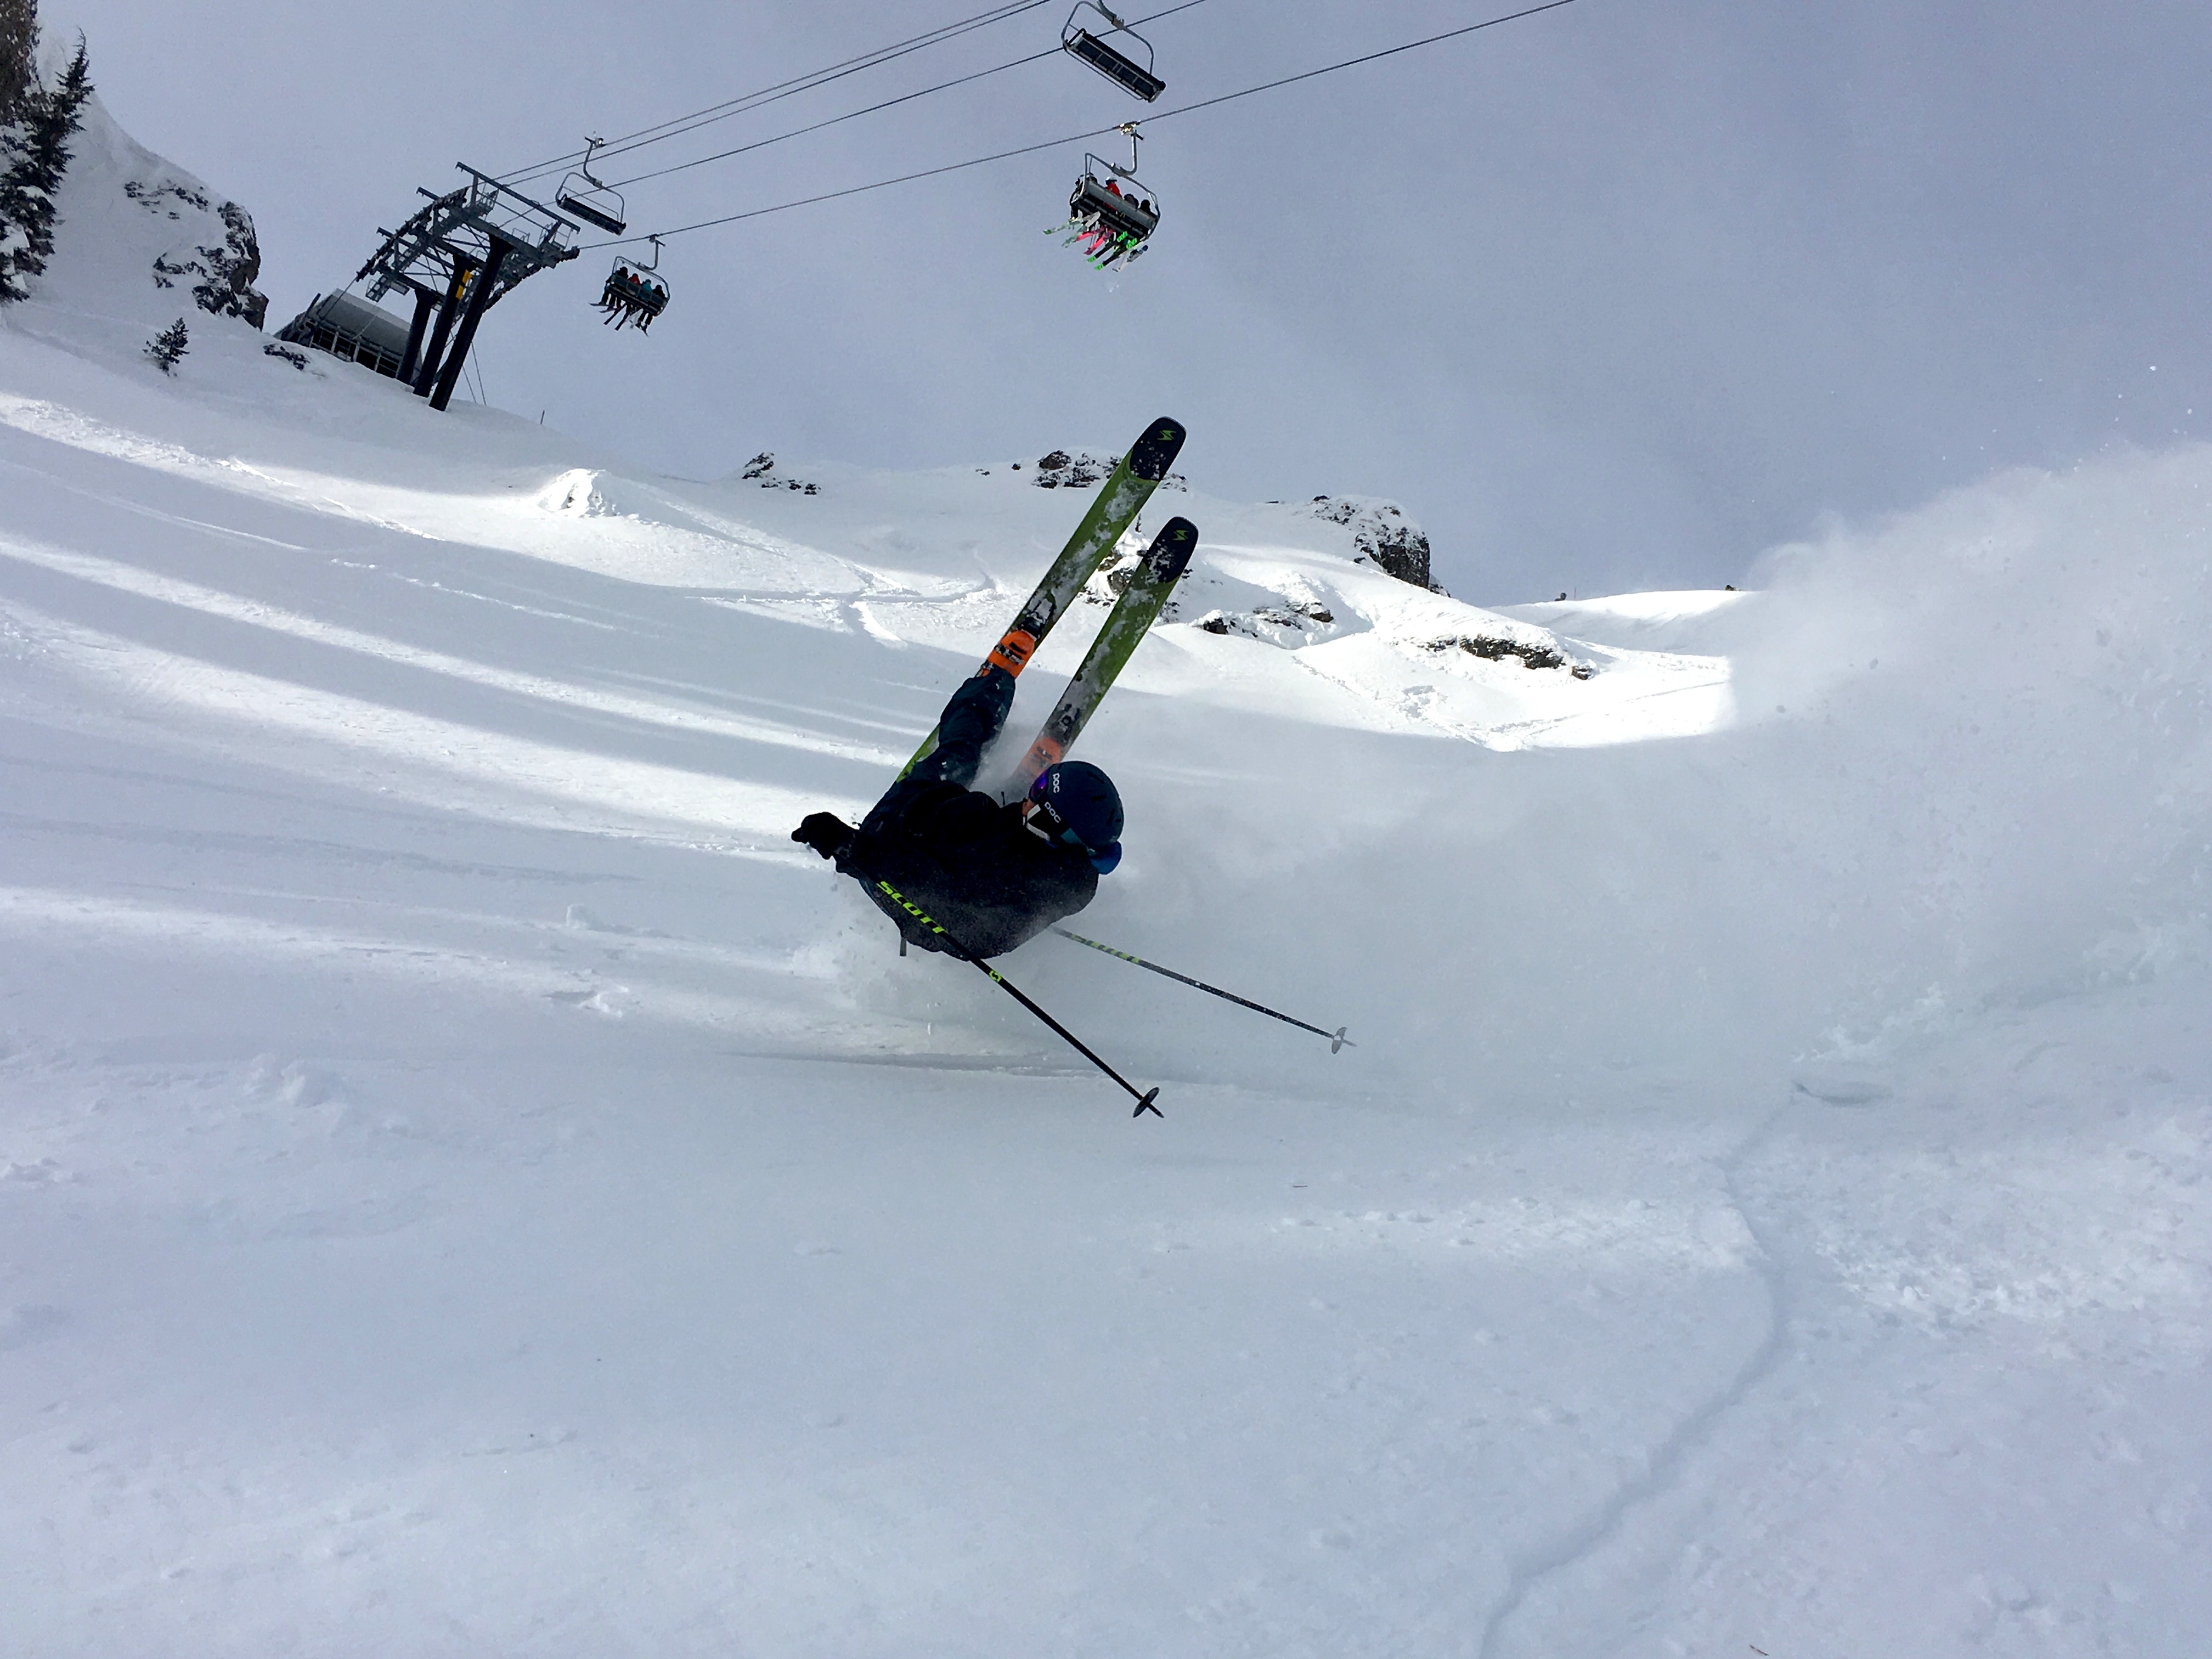 Showing off under the chair on KT-22 yesterday. photo: snowbrains